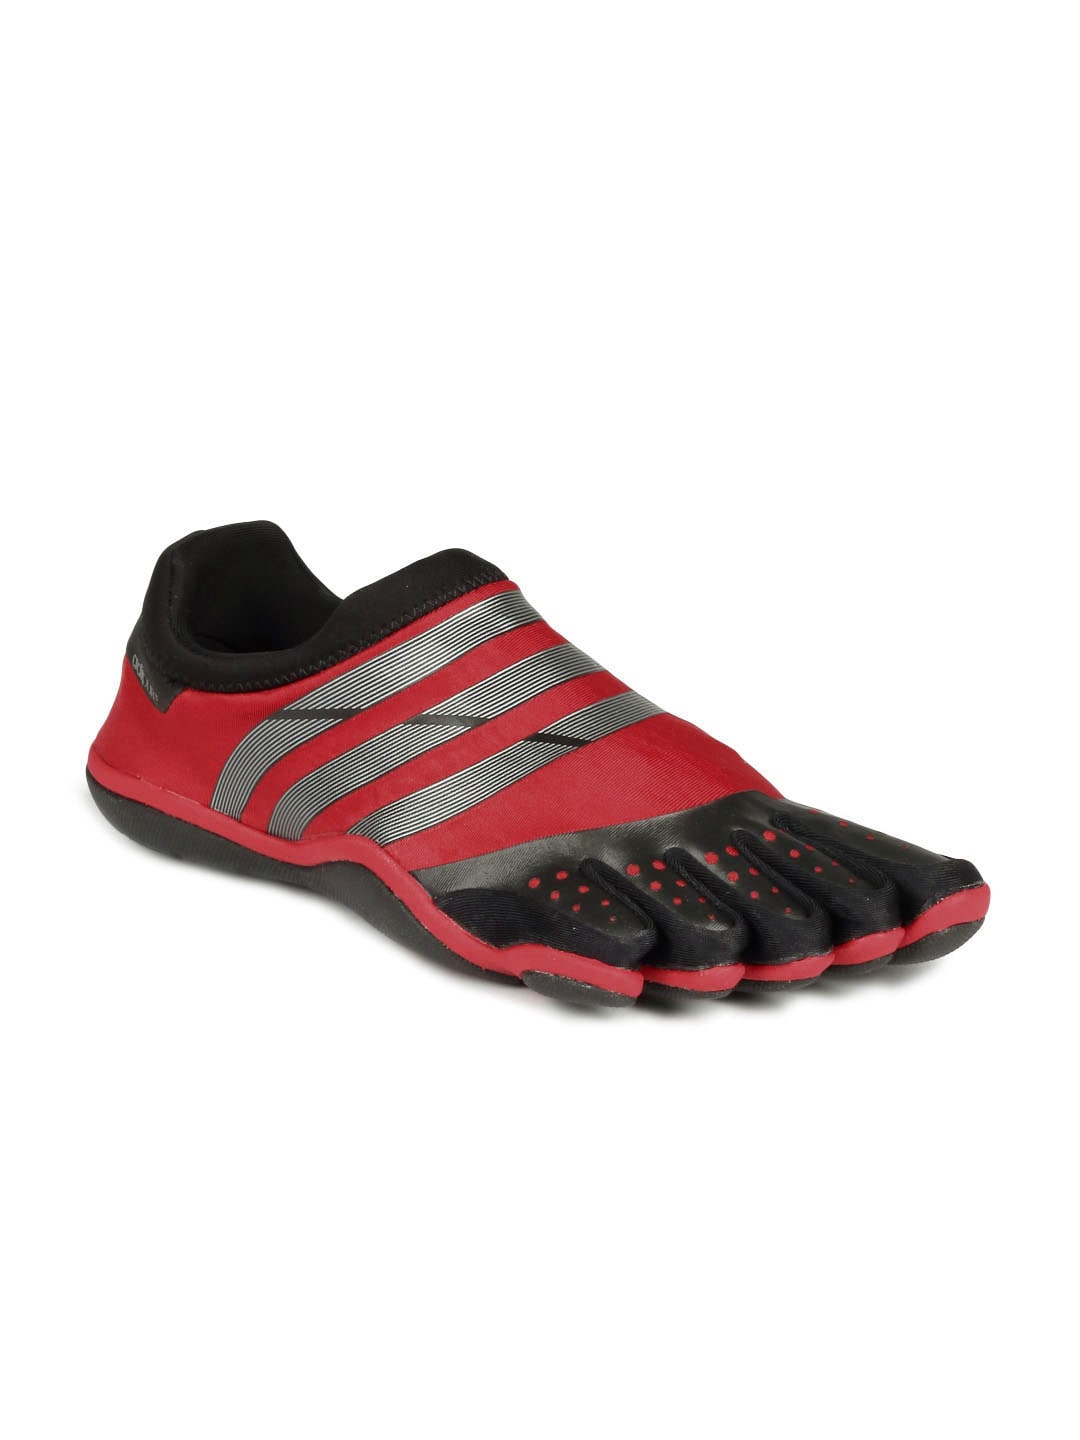 ADIDAS Men Red Adipure Sports Shoes